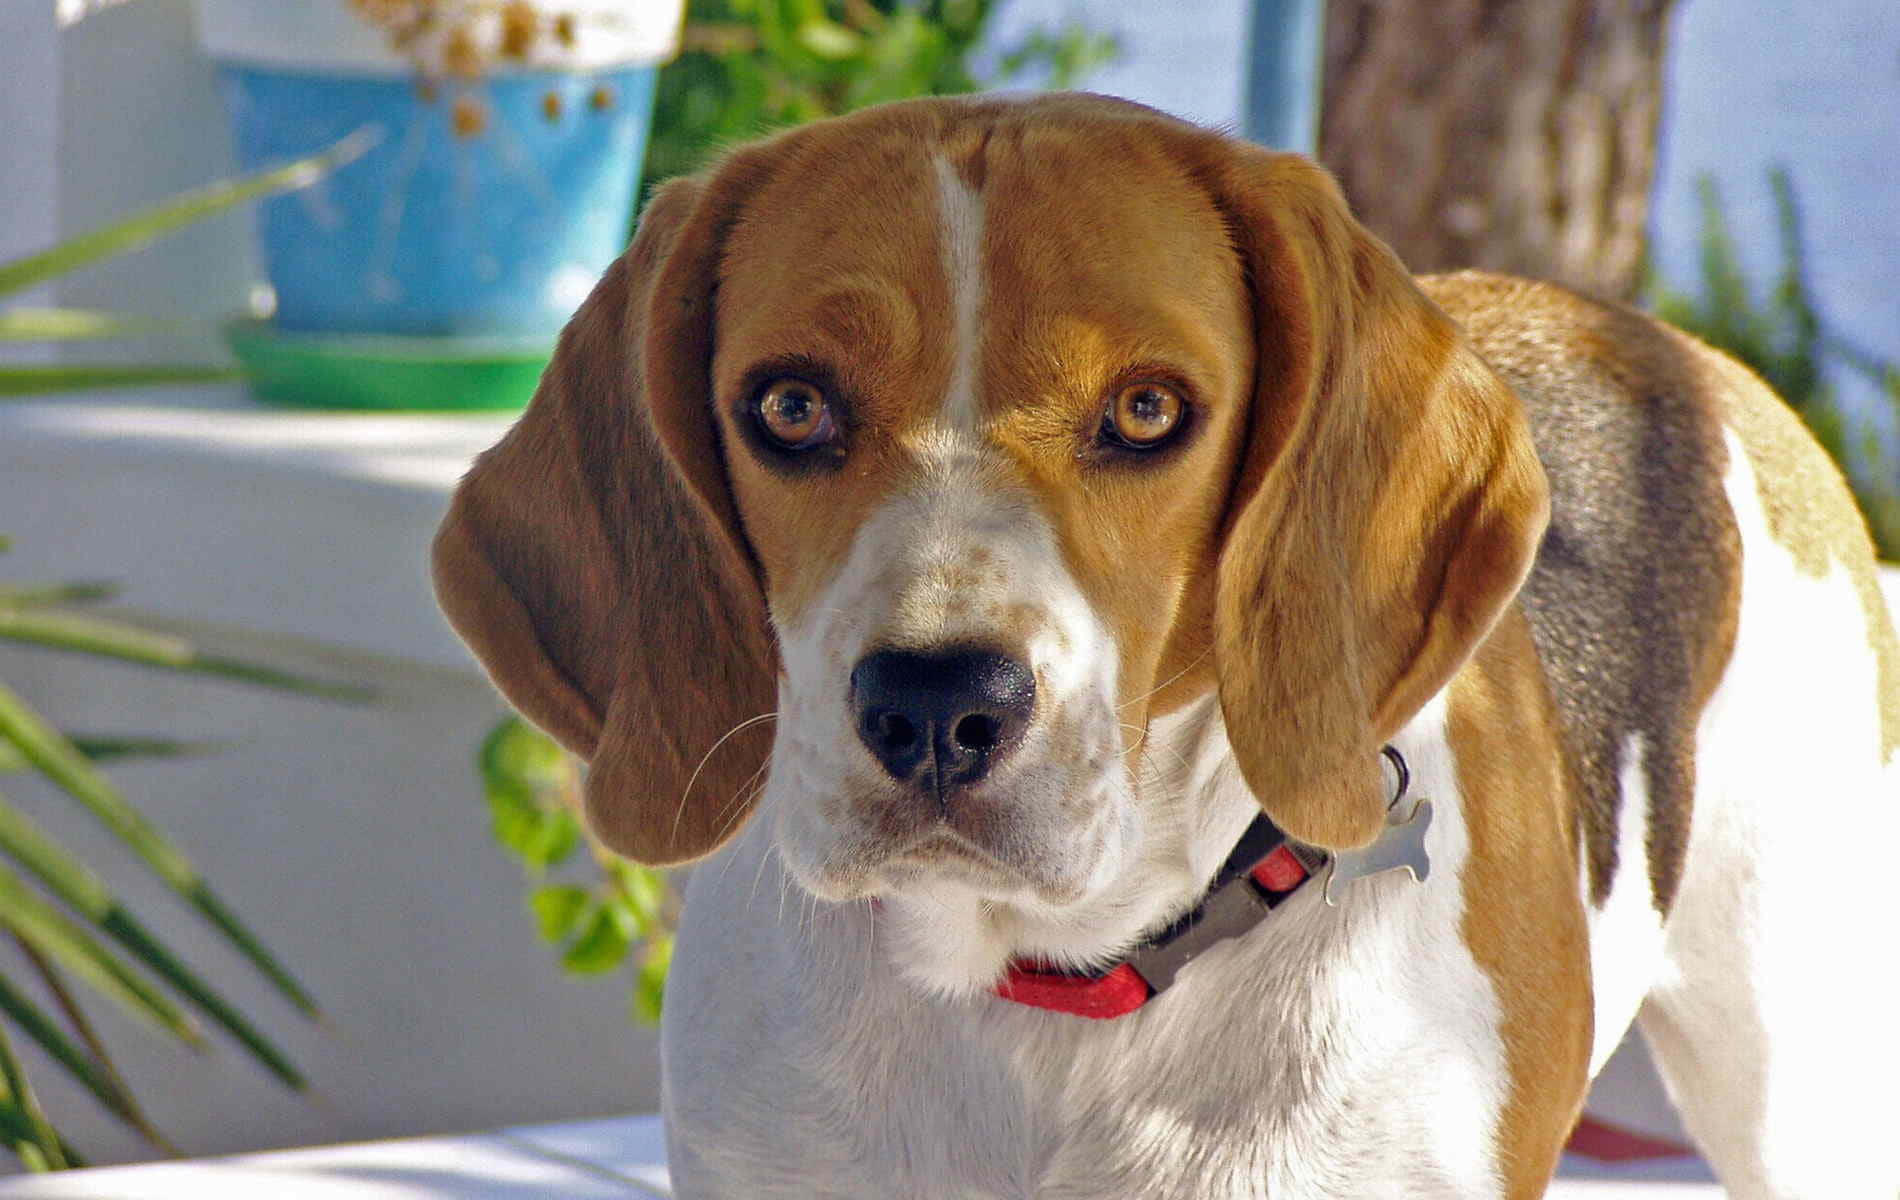 A cute beagle looking up at the camera with its stunning brown eyes